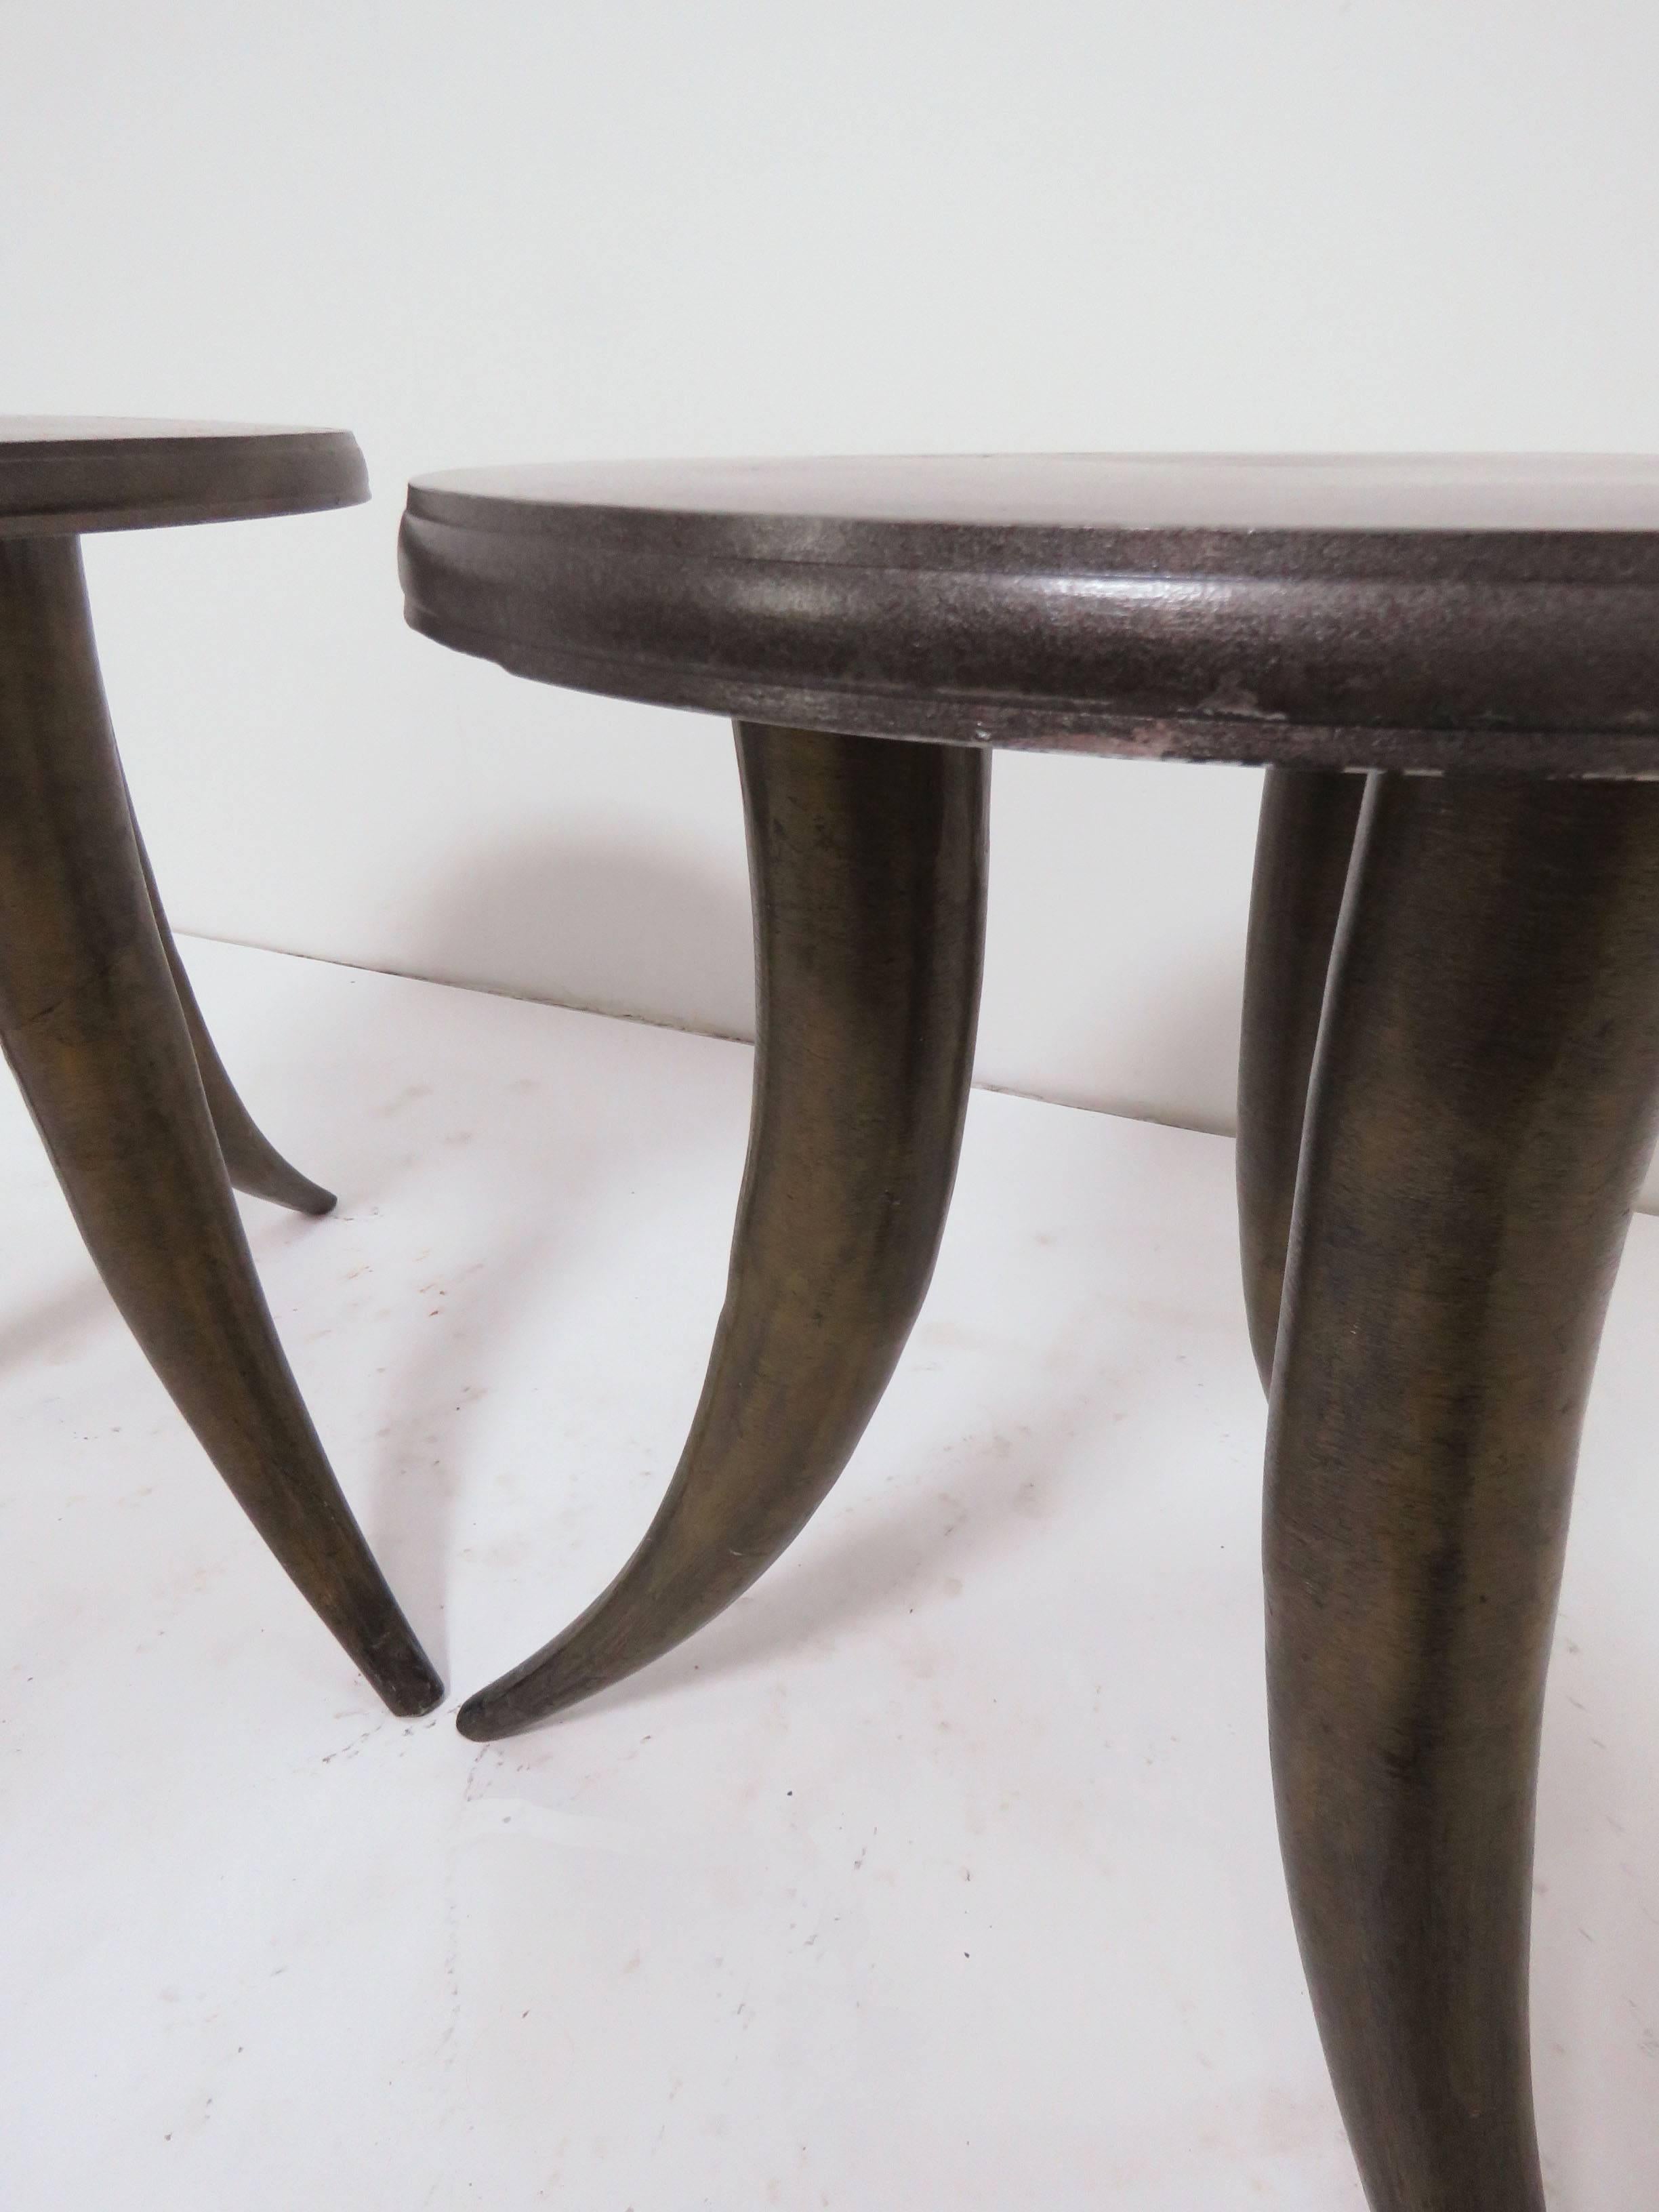 Mid-20th Century Pair of Side Tables or Stools with Tusk Form Legs, circa 1960s